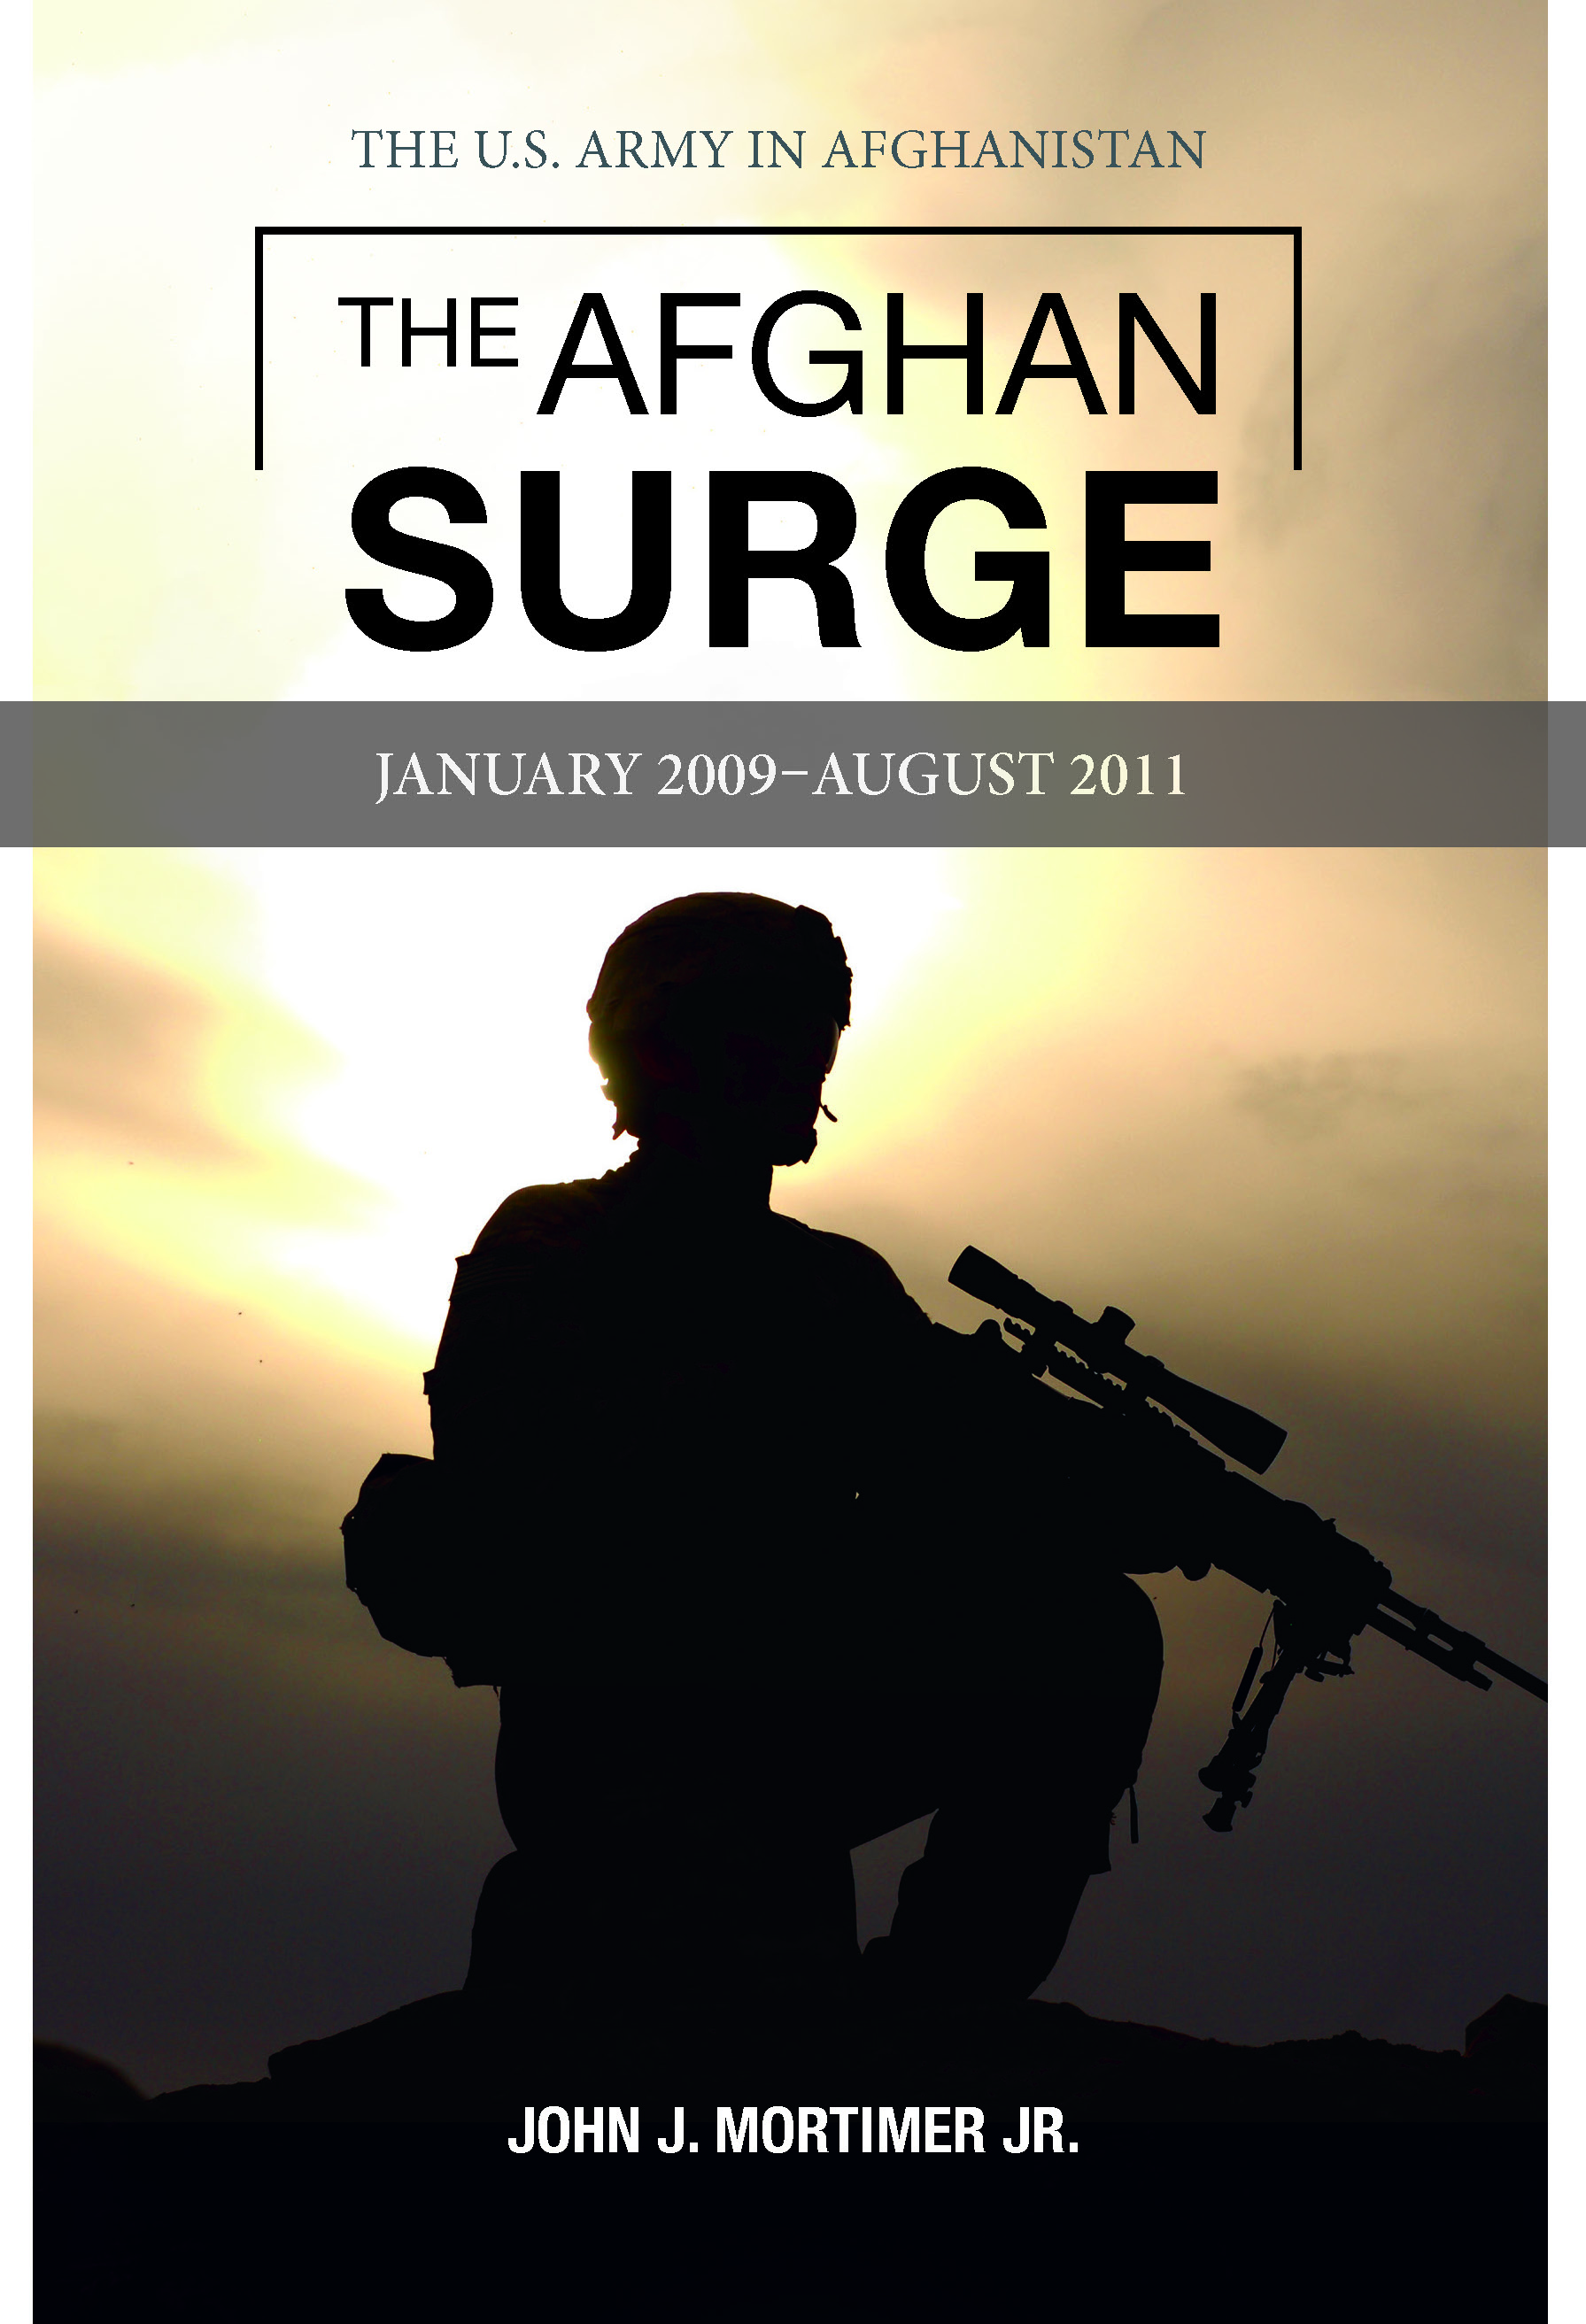 THE AFGHAN SURGE: THE U.S. ARMY IN AFGHANISTAN, JANUARY 2009-AUGUST 2011